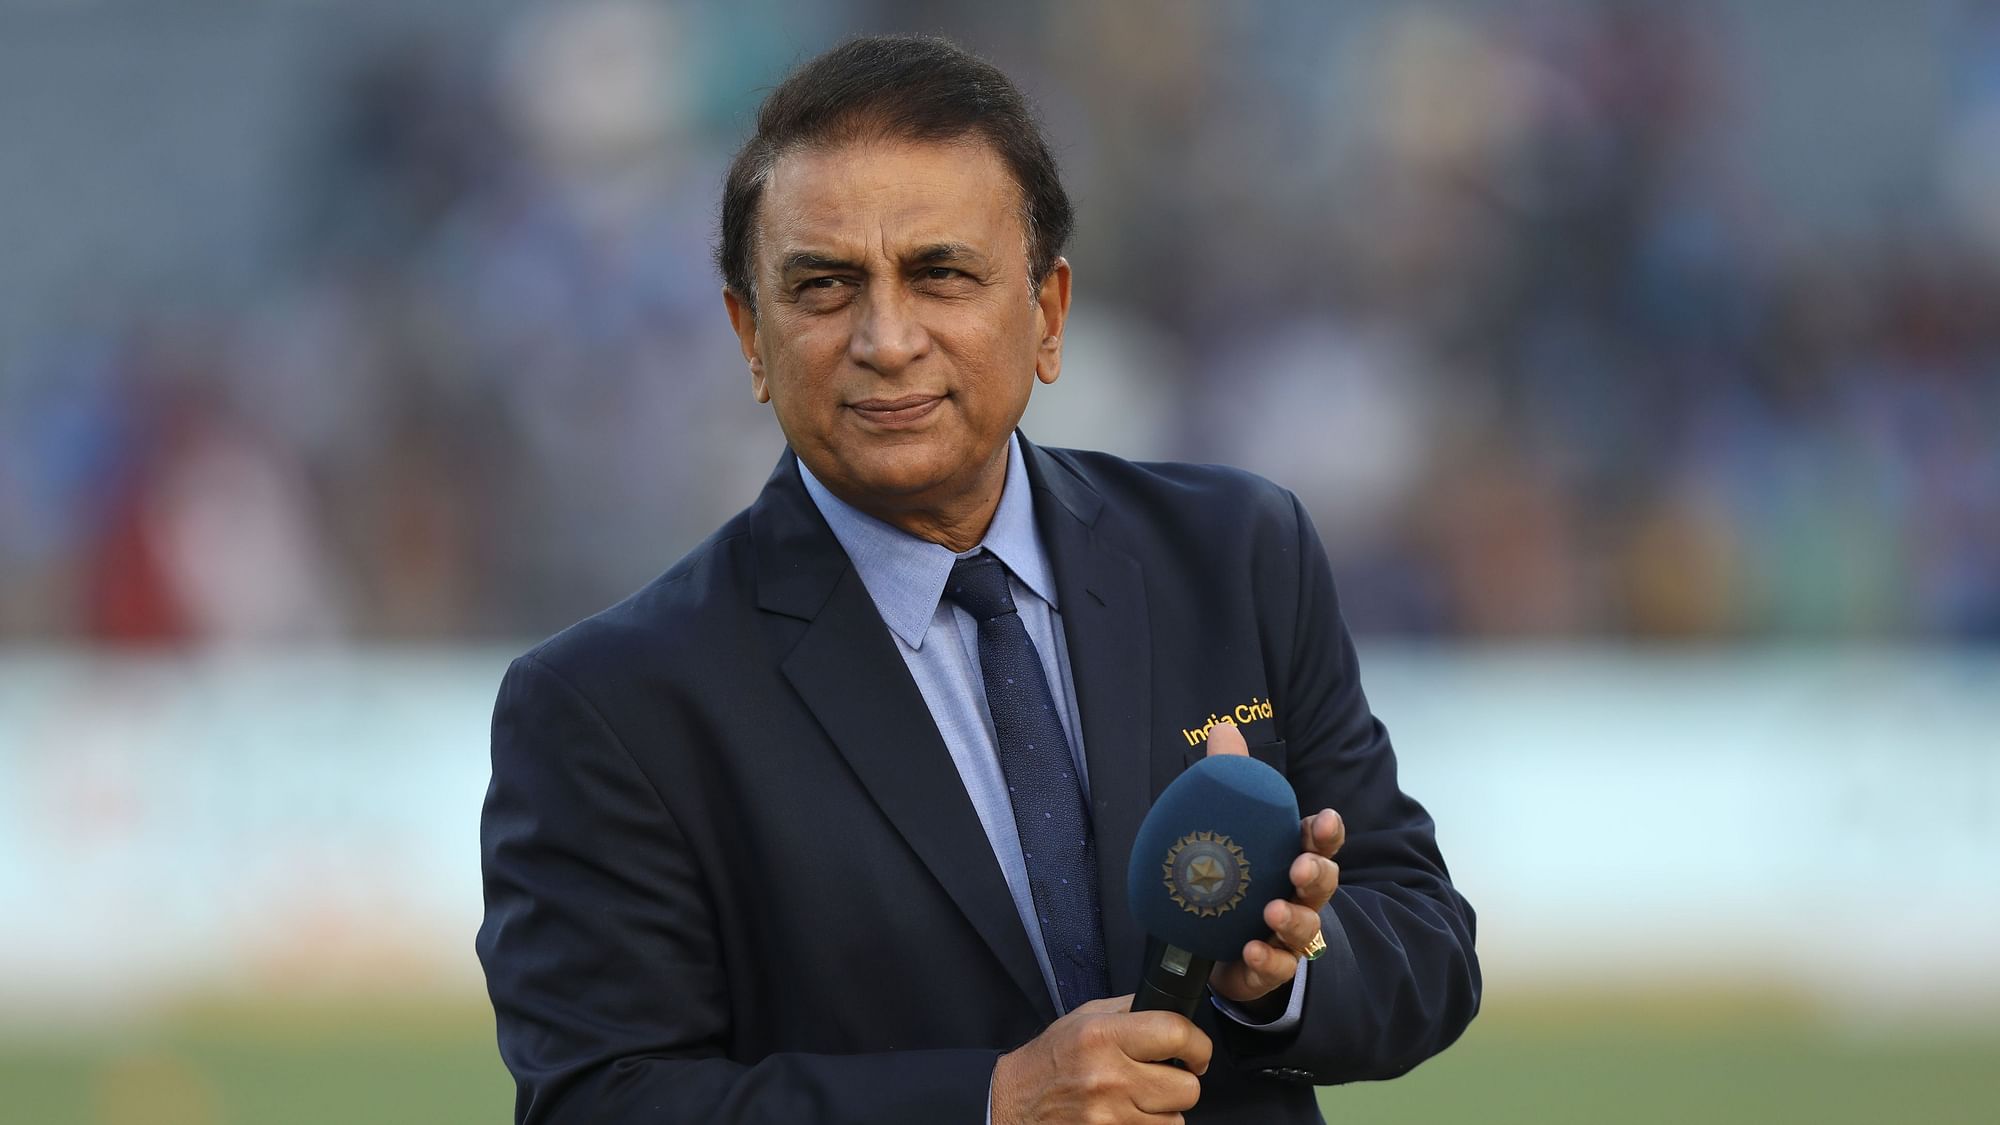 Former India captain Sunil Gavaskar was part of the India team that was shot out for 42 by England at Lord’s over 46 years ago.